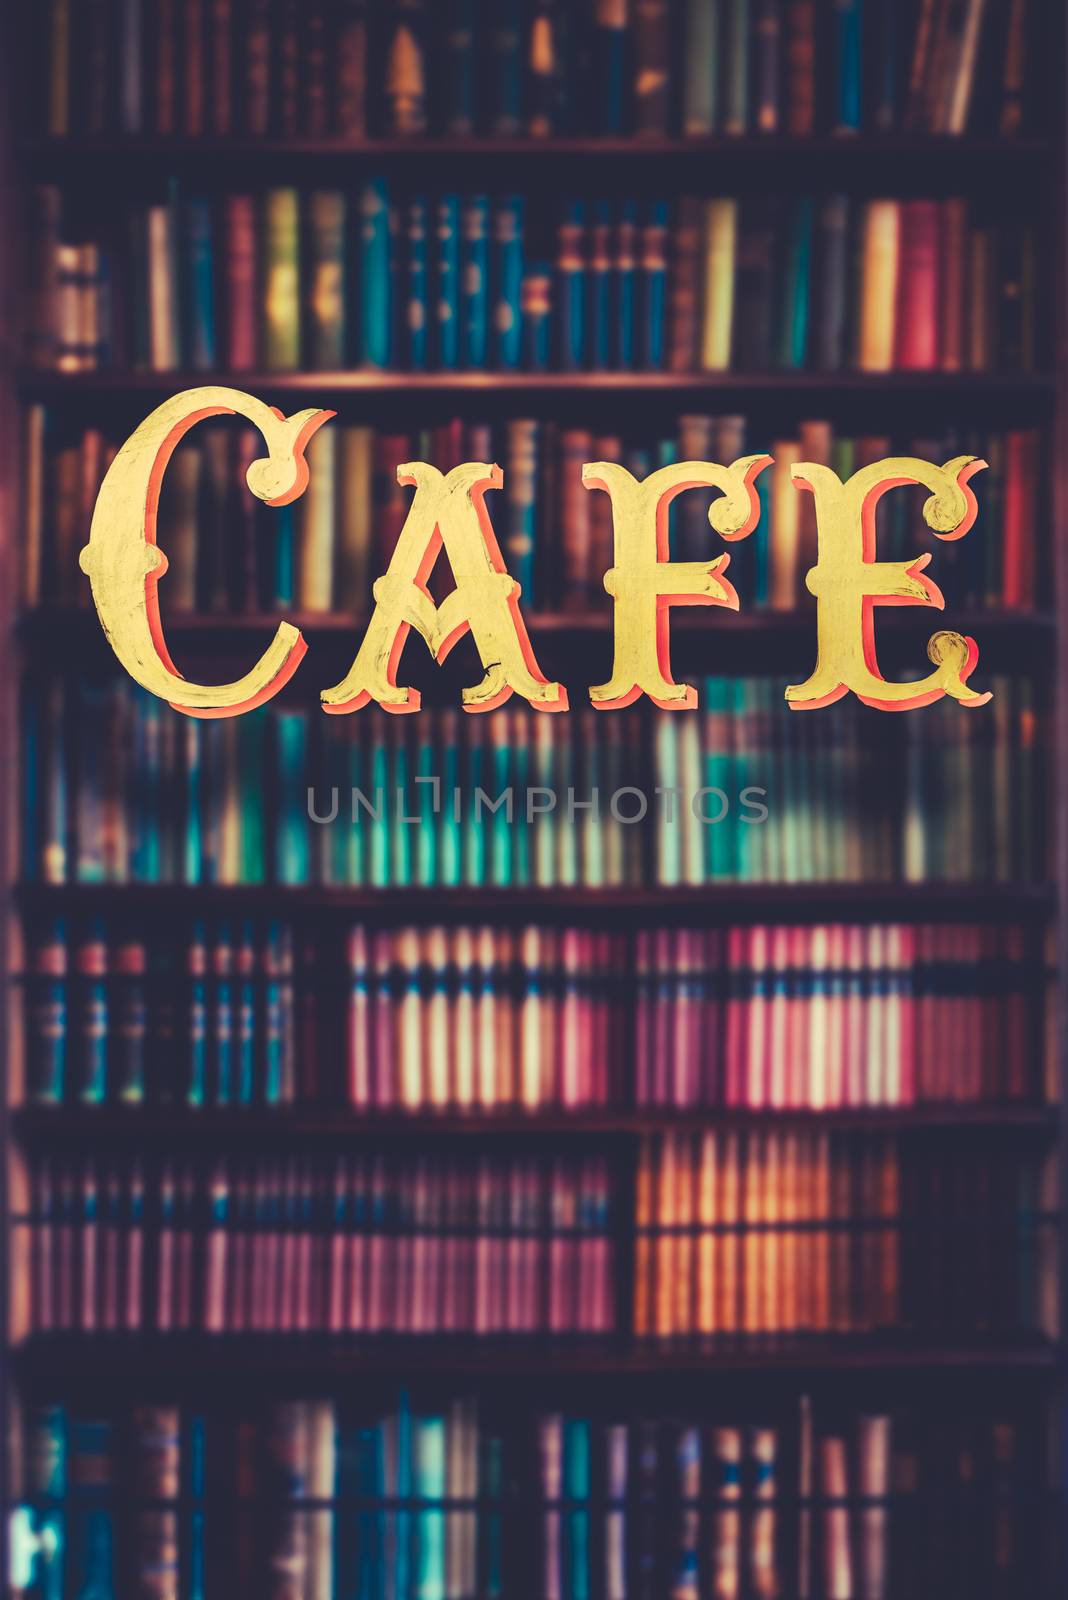 Book Store Cafe by mrdoomits